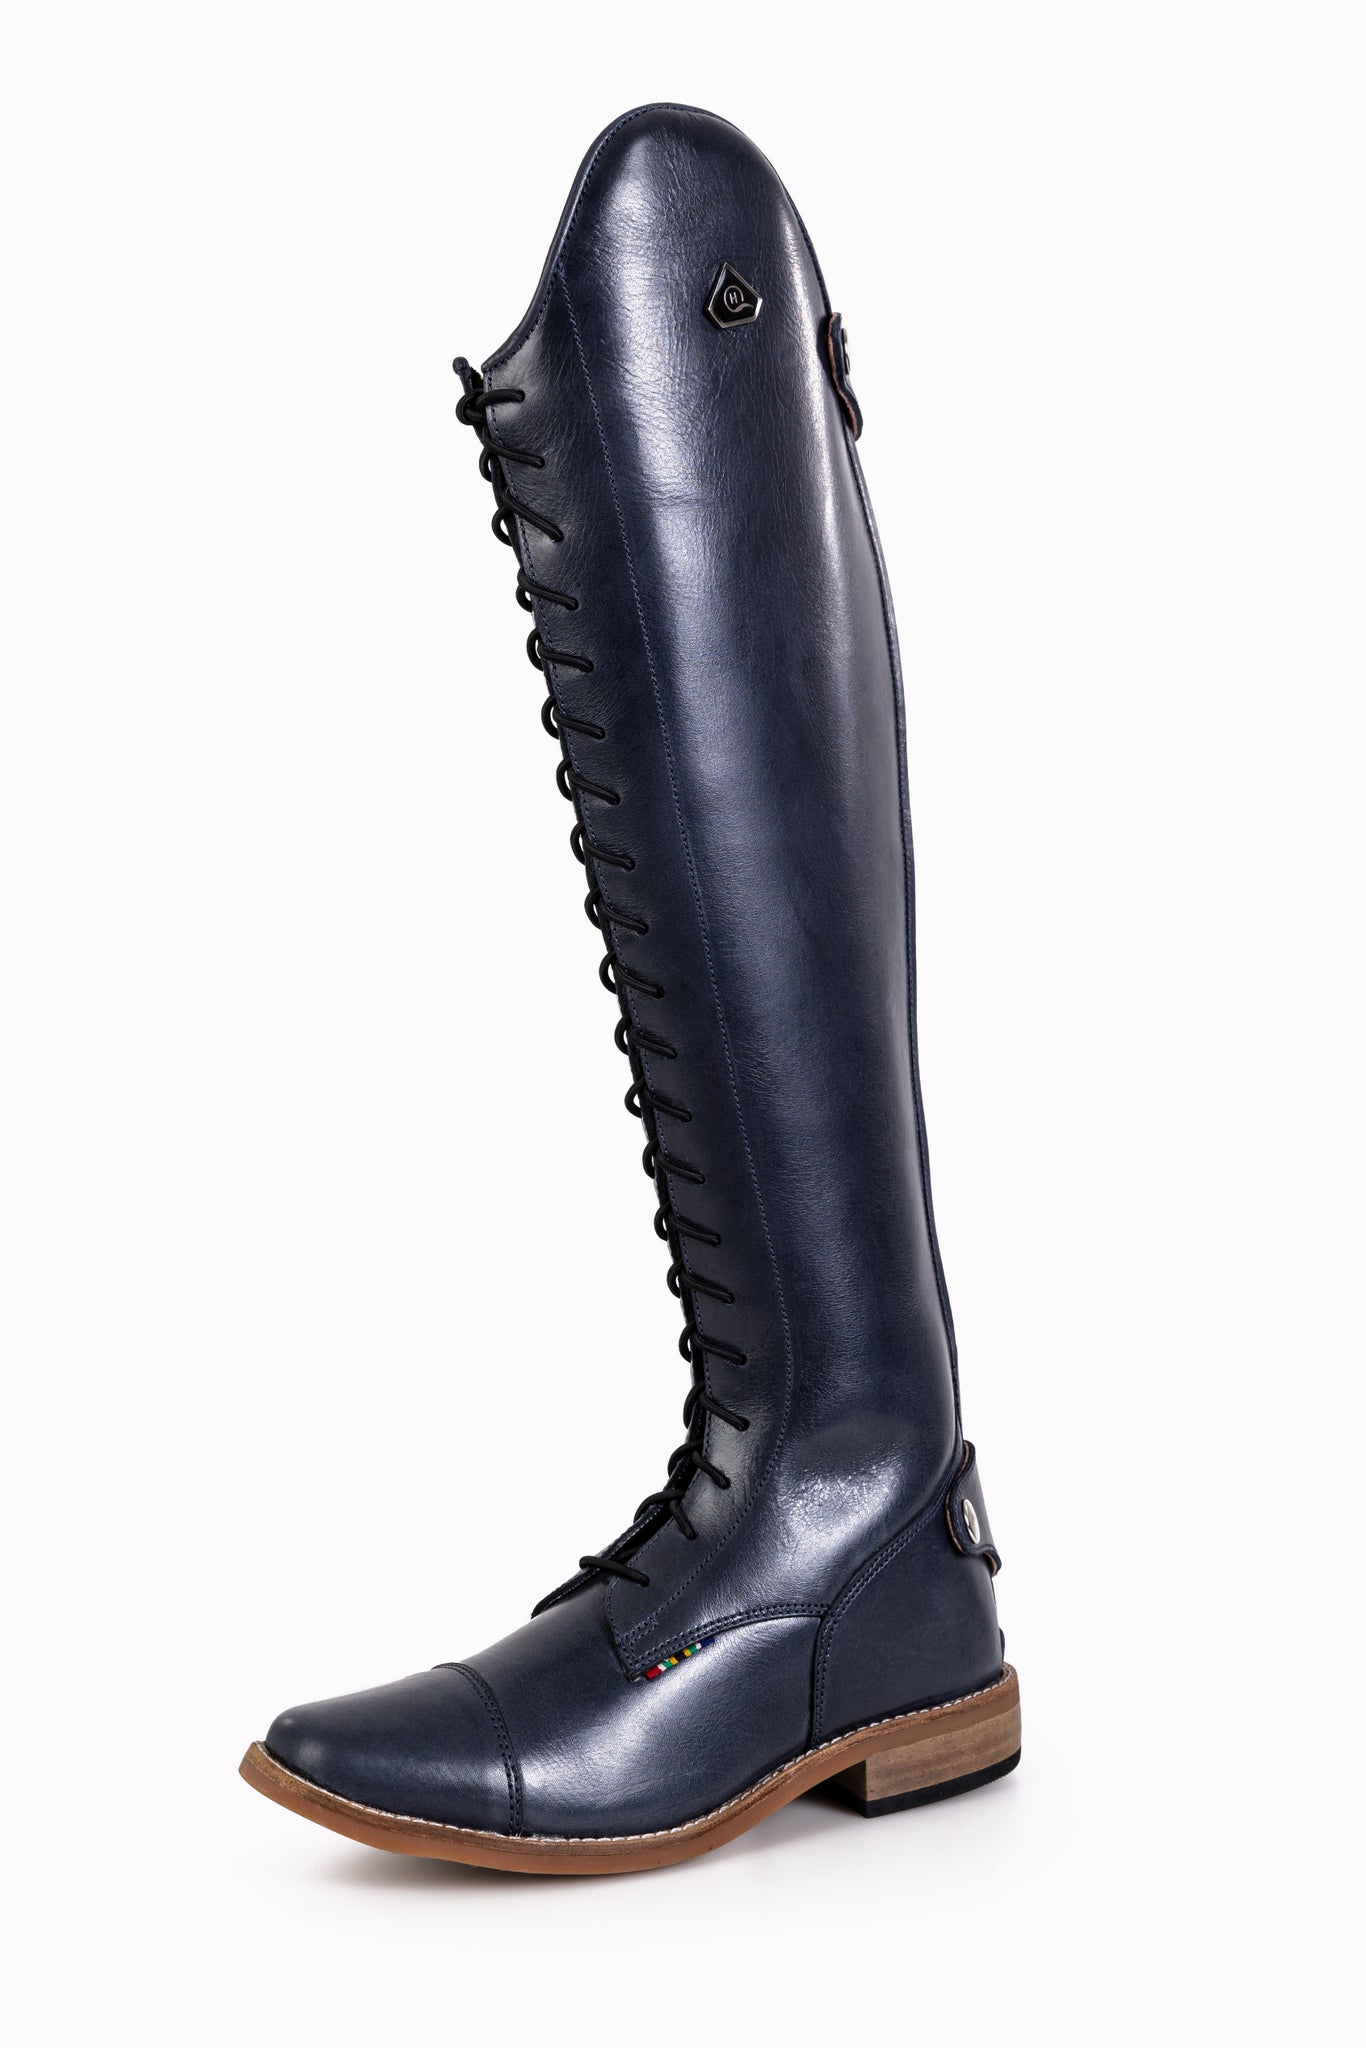 Women's Long Boots | Hello Quality Equestrian